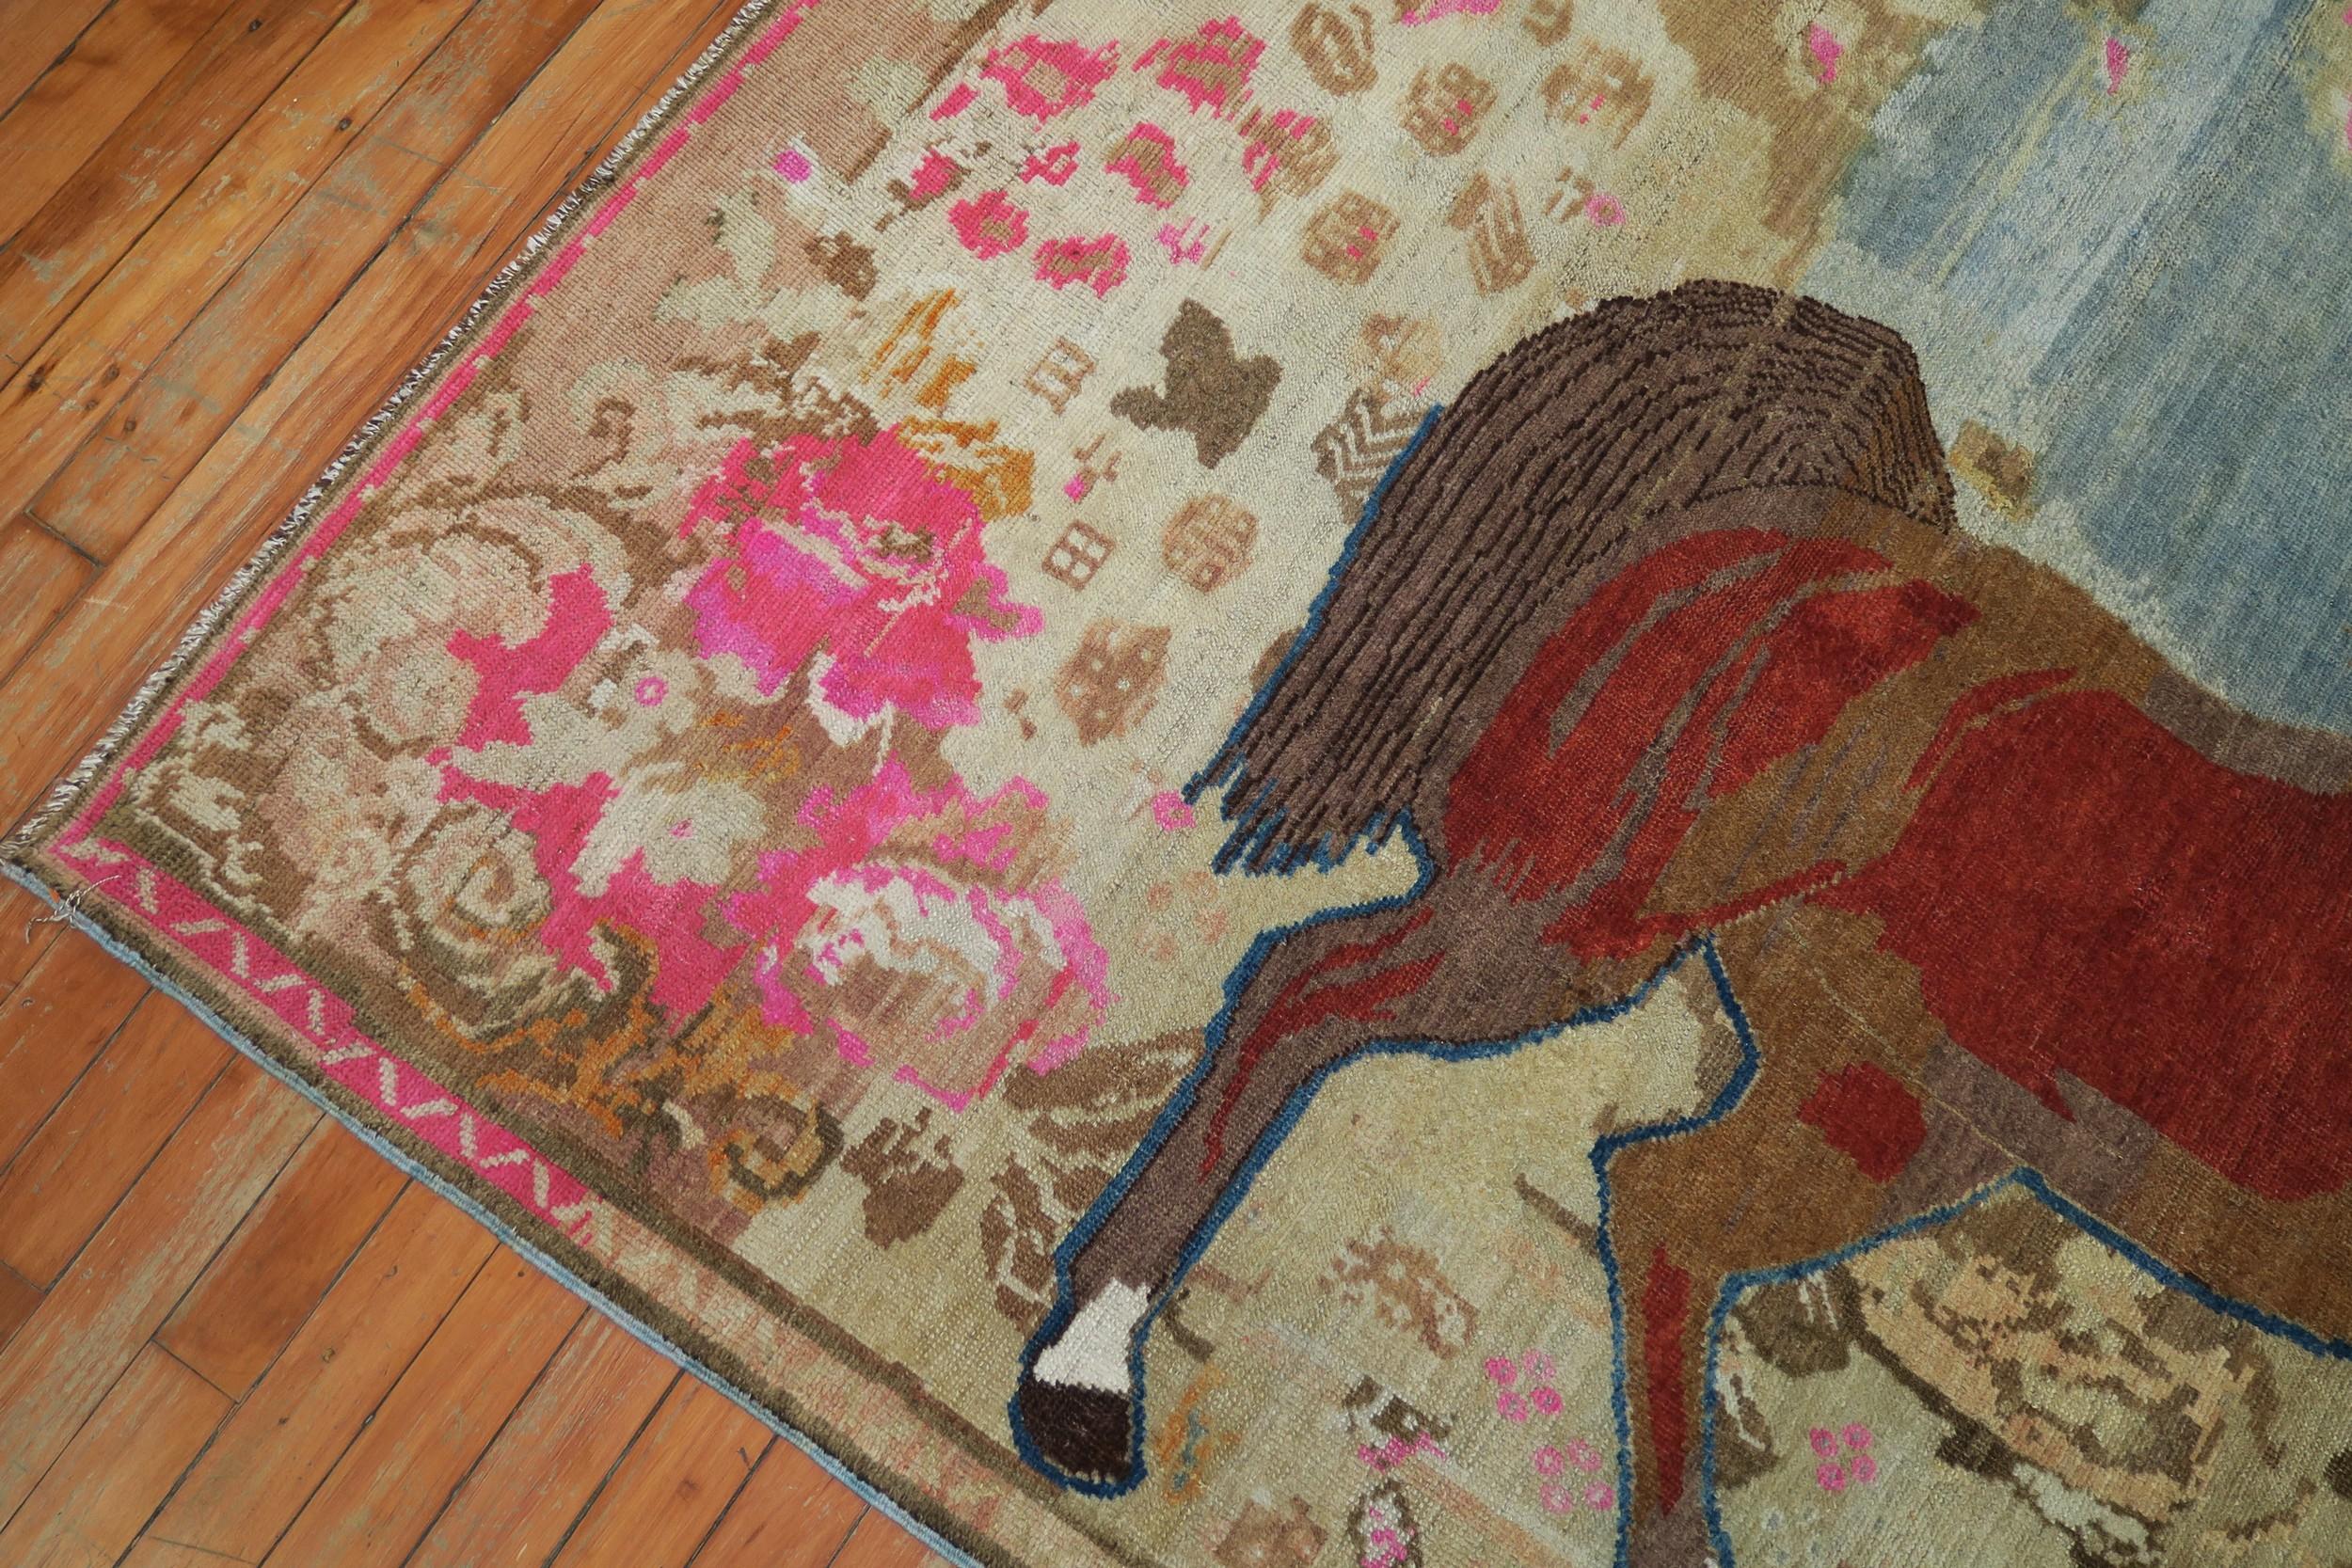 Folk Art Antique Russian Brown Horse 20th Century Pictorial Wool Decorative Rug For Sale